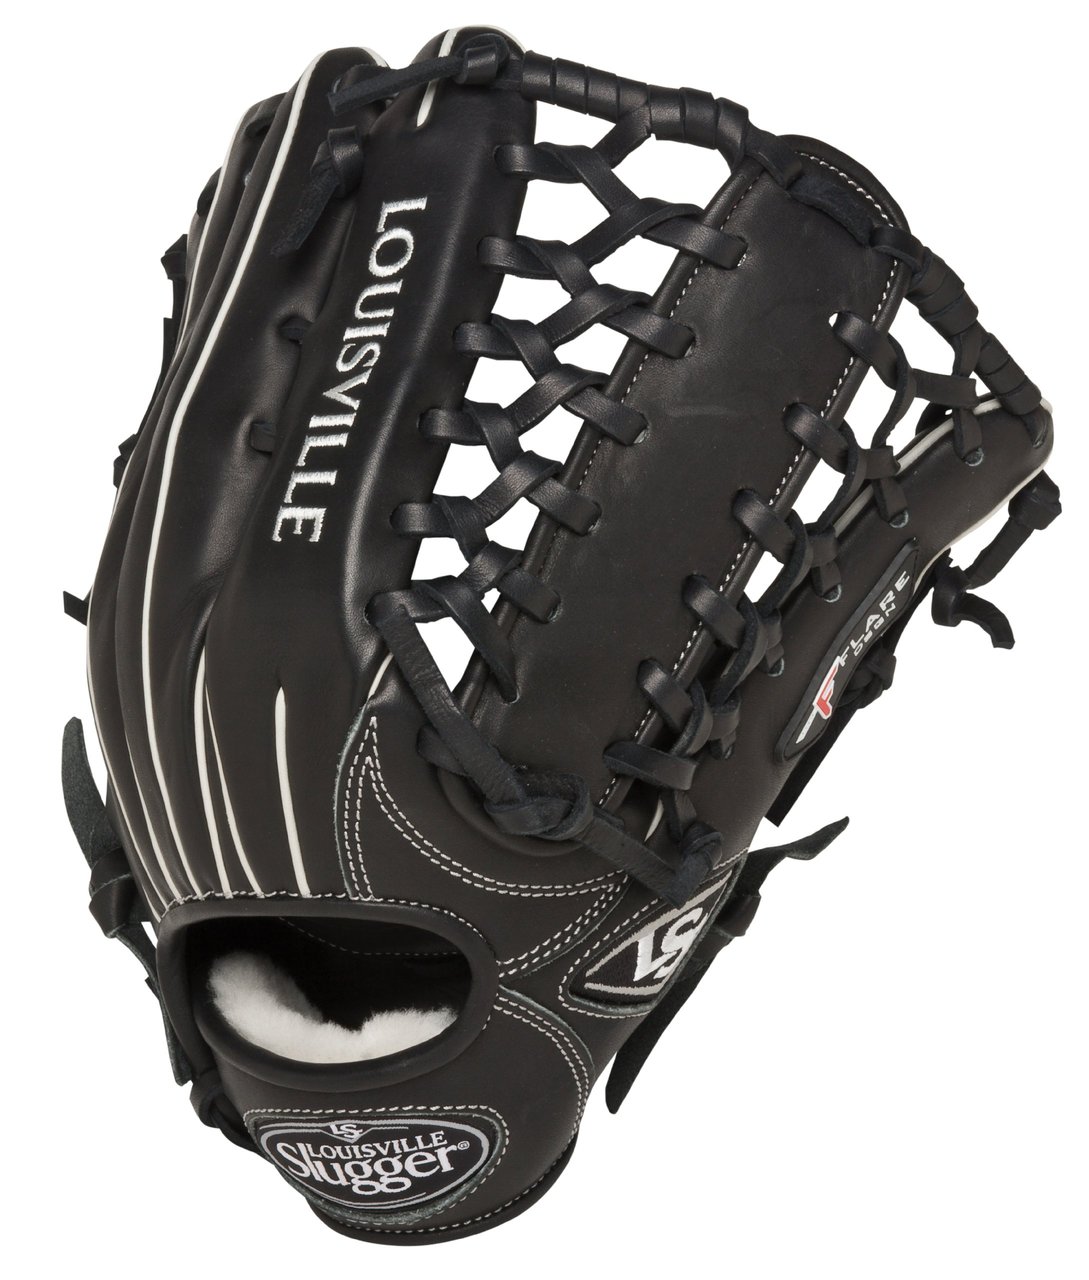 Louisville Slugger Pro Flare 13 inch Outfield Baseball Glove (Left Handed Throw) : Louisville Slugger Pro Flare Fielding Gloves are preferred by top professional and college players. They are designed with the speed of the game in mind. Louisville Slugger Pro Flare gloves are designed to keep pace with the evolution of Baseball. The unique Flare design allows for quick-transfer of ball from glove to hand. Better technology, better materials and better design. There is a larger catching surface area made possible by the extra wide lacing and curved finger tips. The gloves are made from professional-grade, oil-infused leather for maximum feel and performance right off the shelf. The Louisville Slugger Pro Flare has unmatched durability and quick break-in.